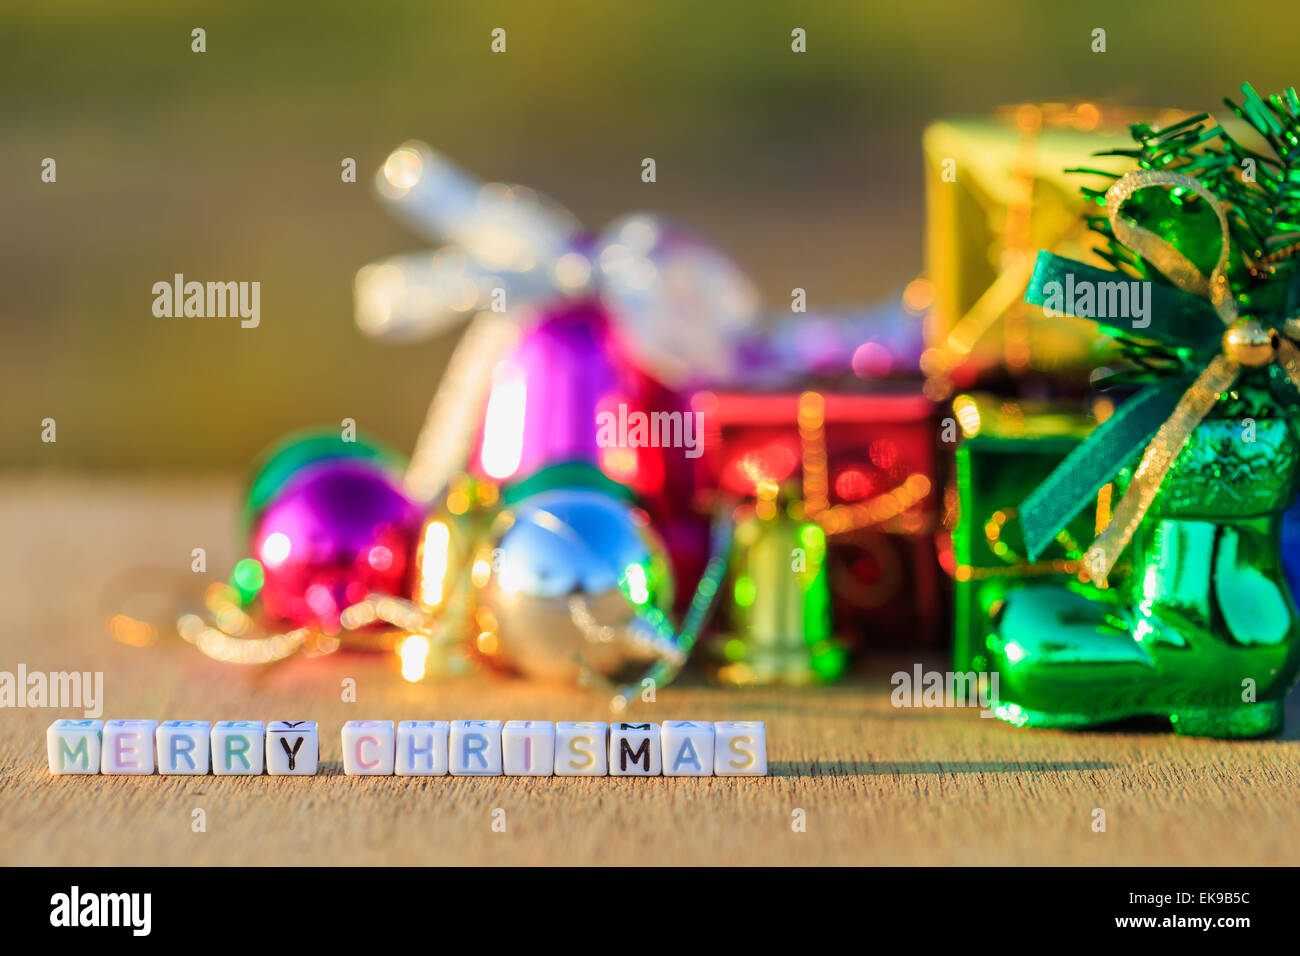 Merry Chrismas written in letter beads and Christmas decorations Stock Photo